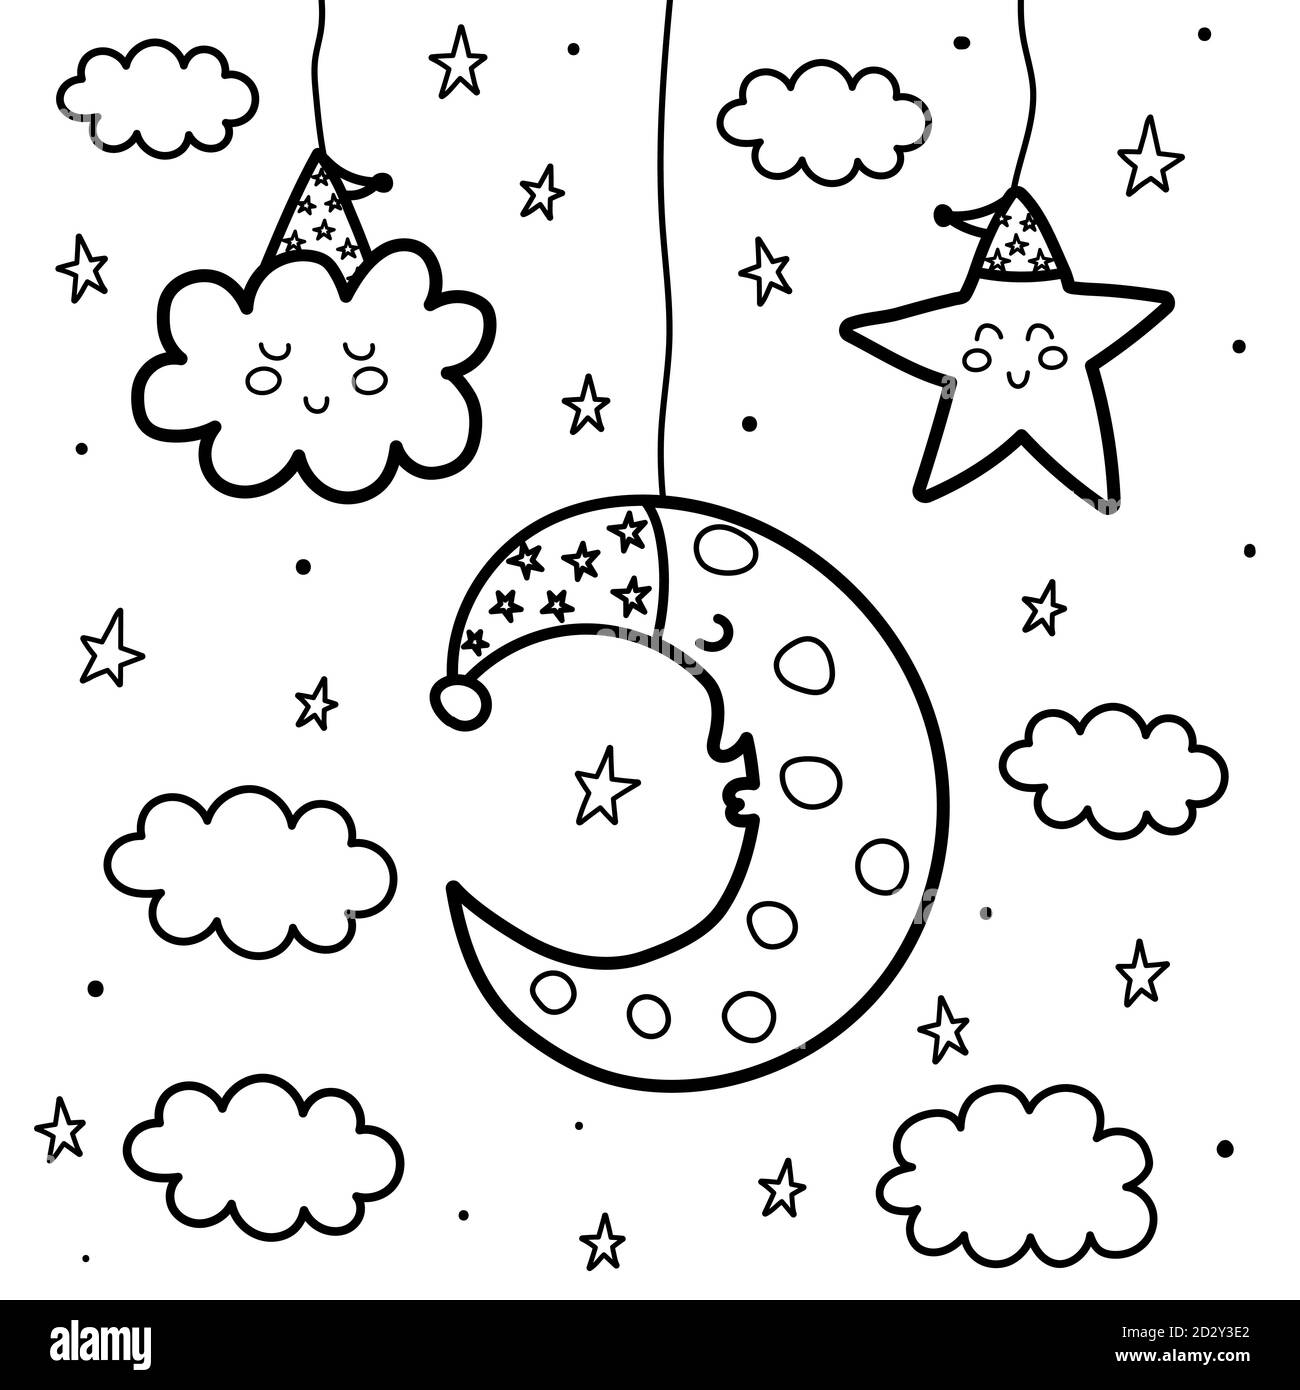 Sleeping moon and star at night coloring page sweet dreams black and white card stock vector image art